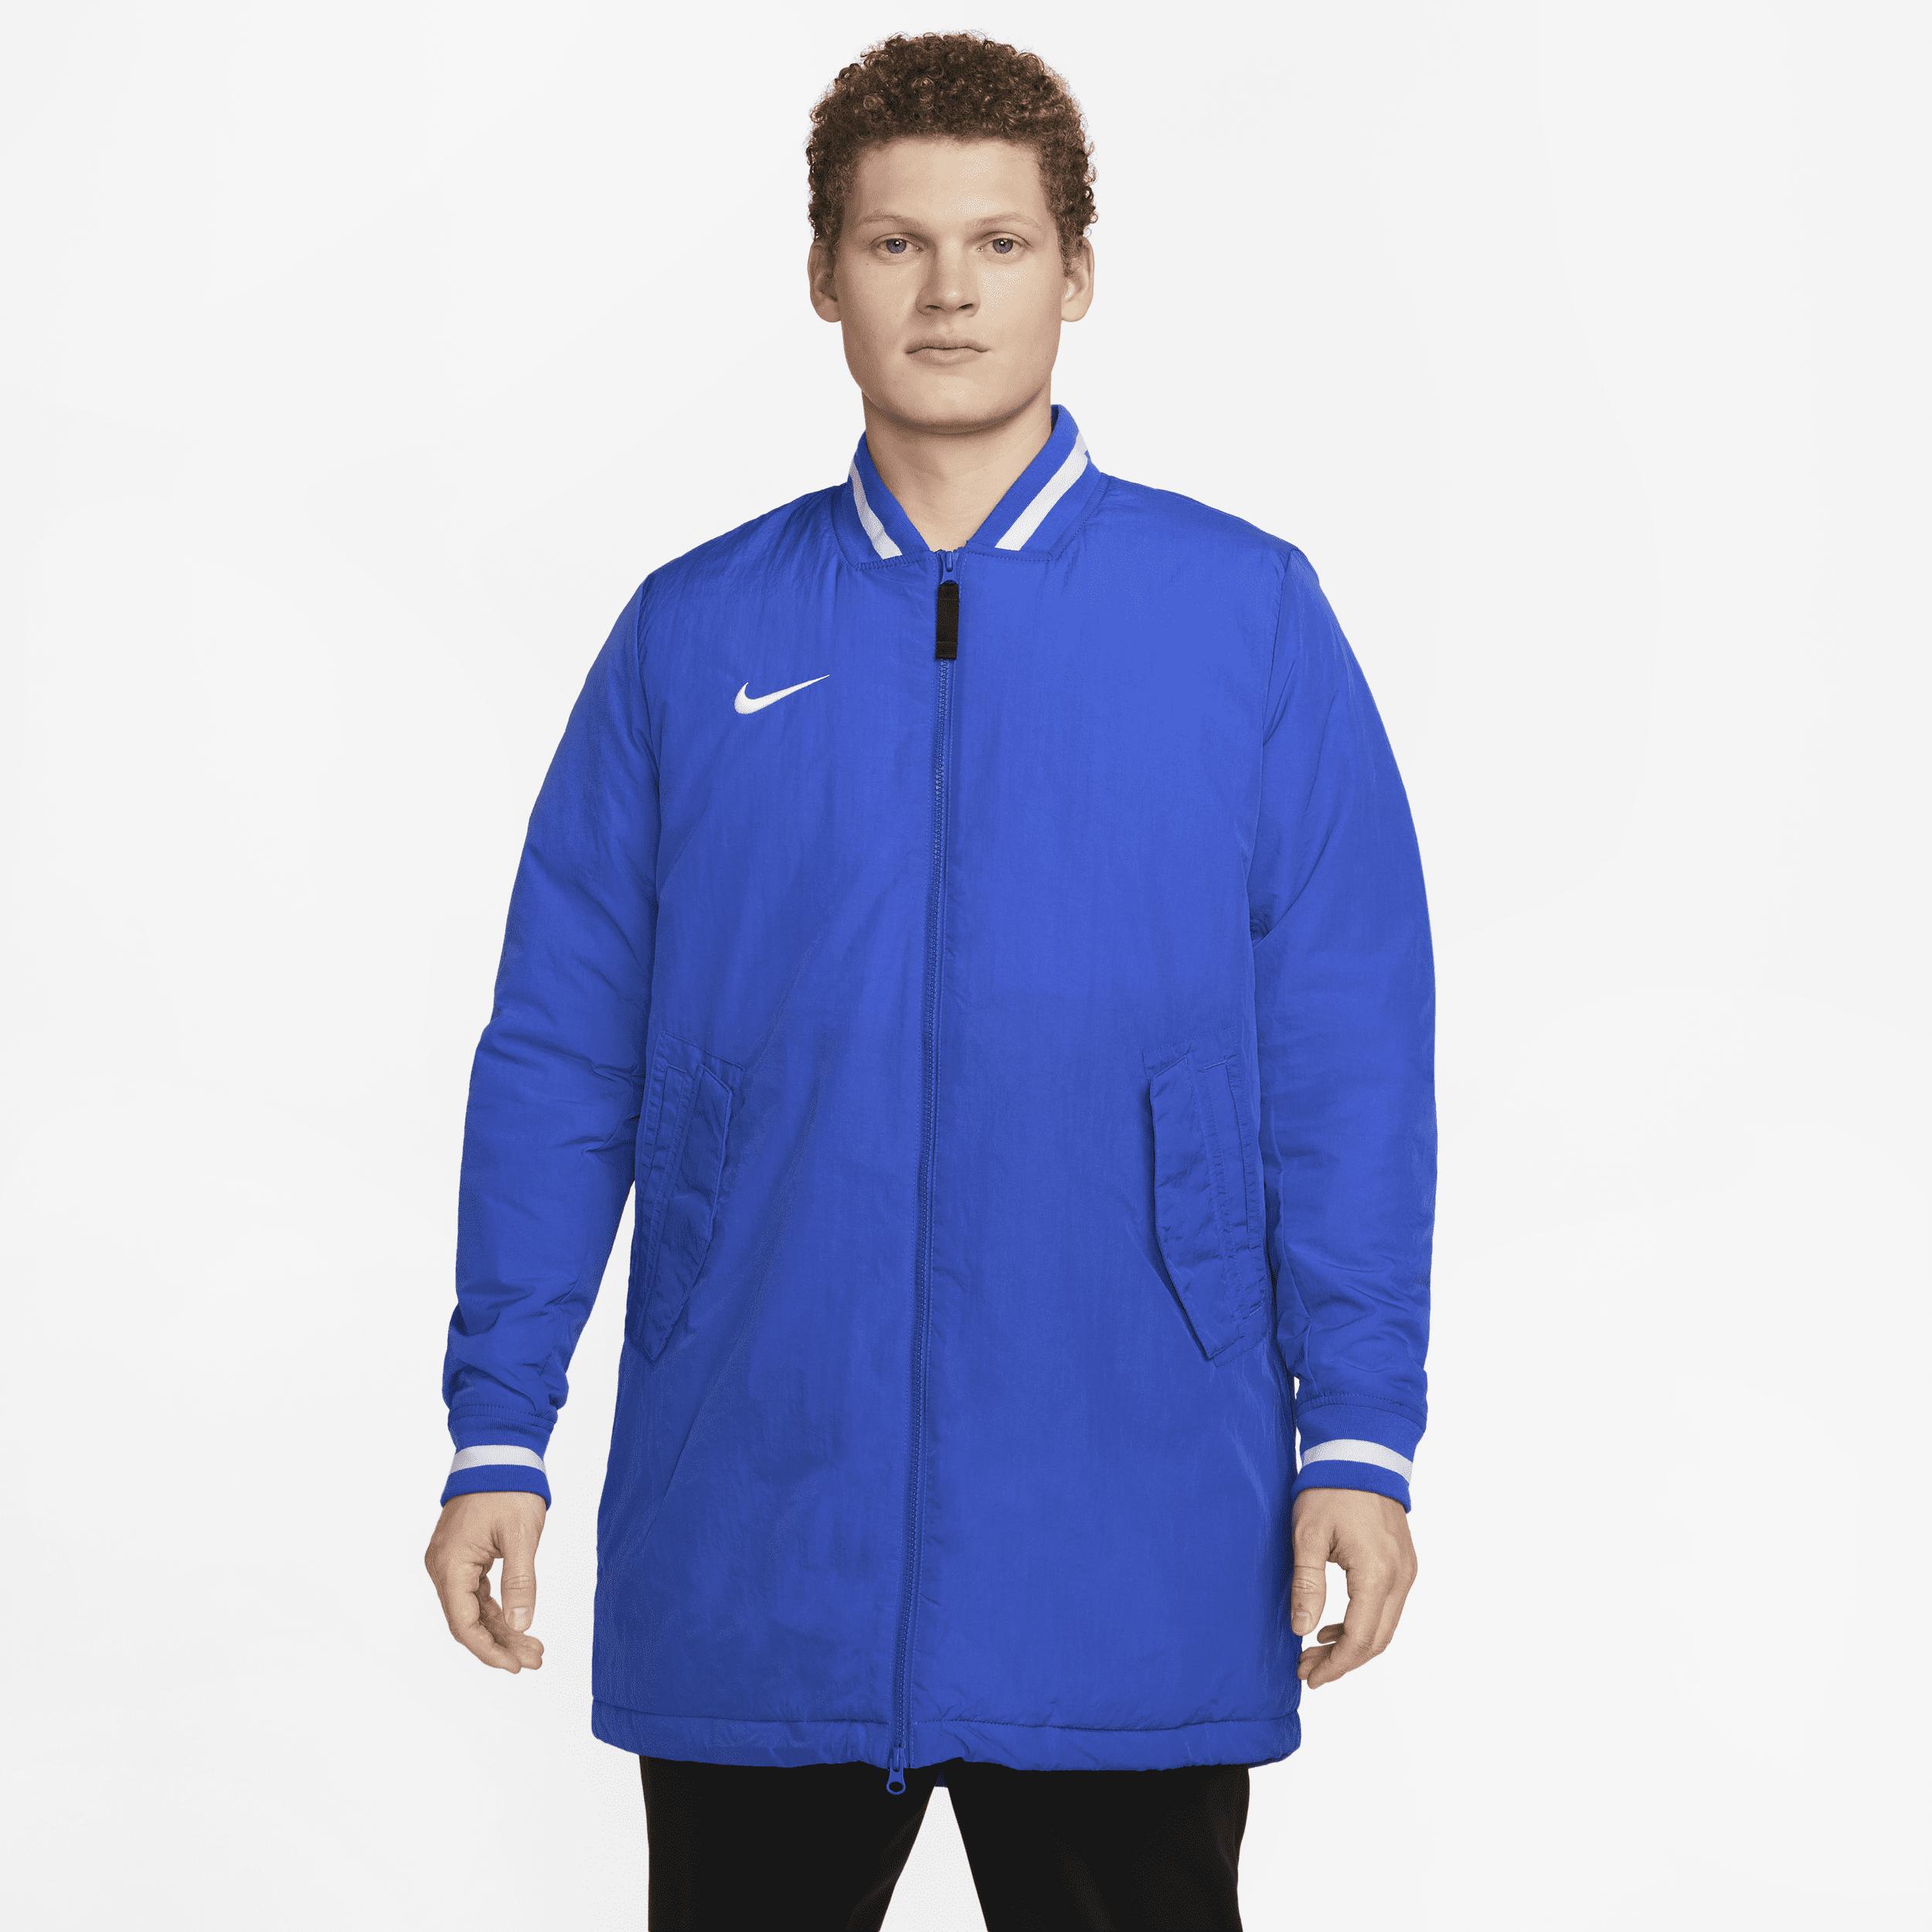 Boston Red Sox Nike City Connect Dugout Jacket